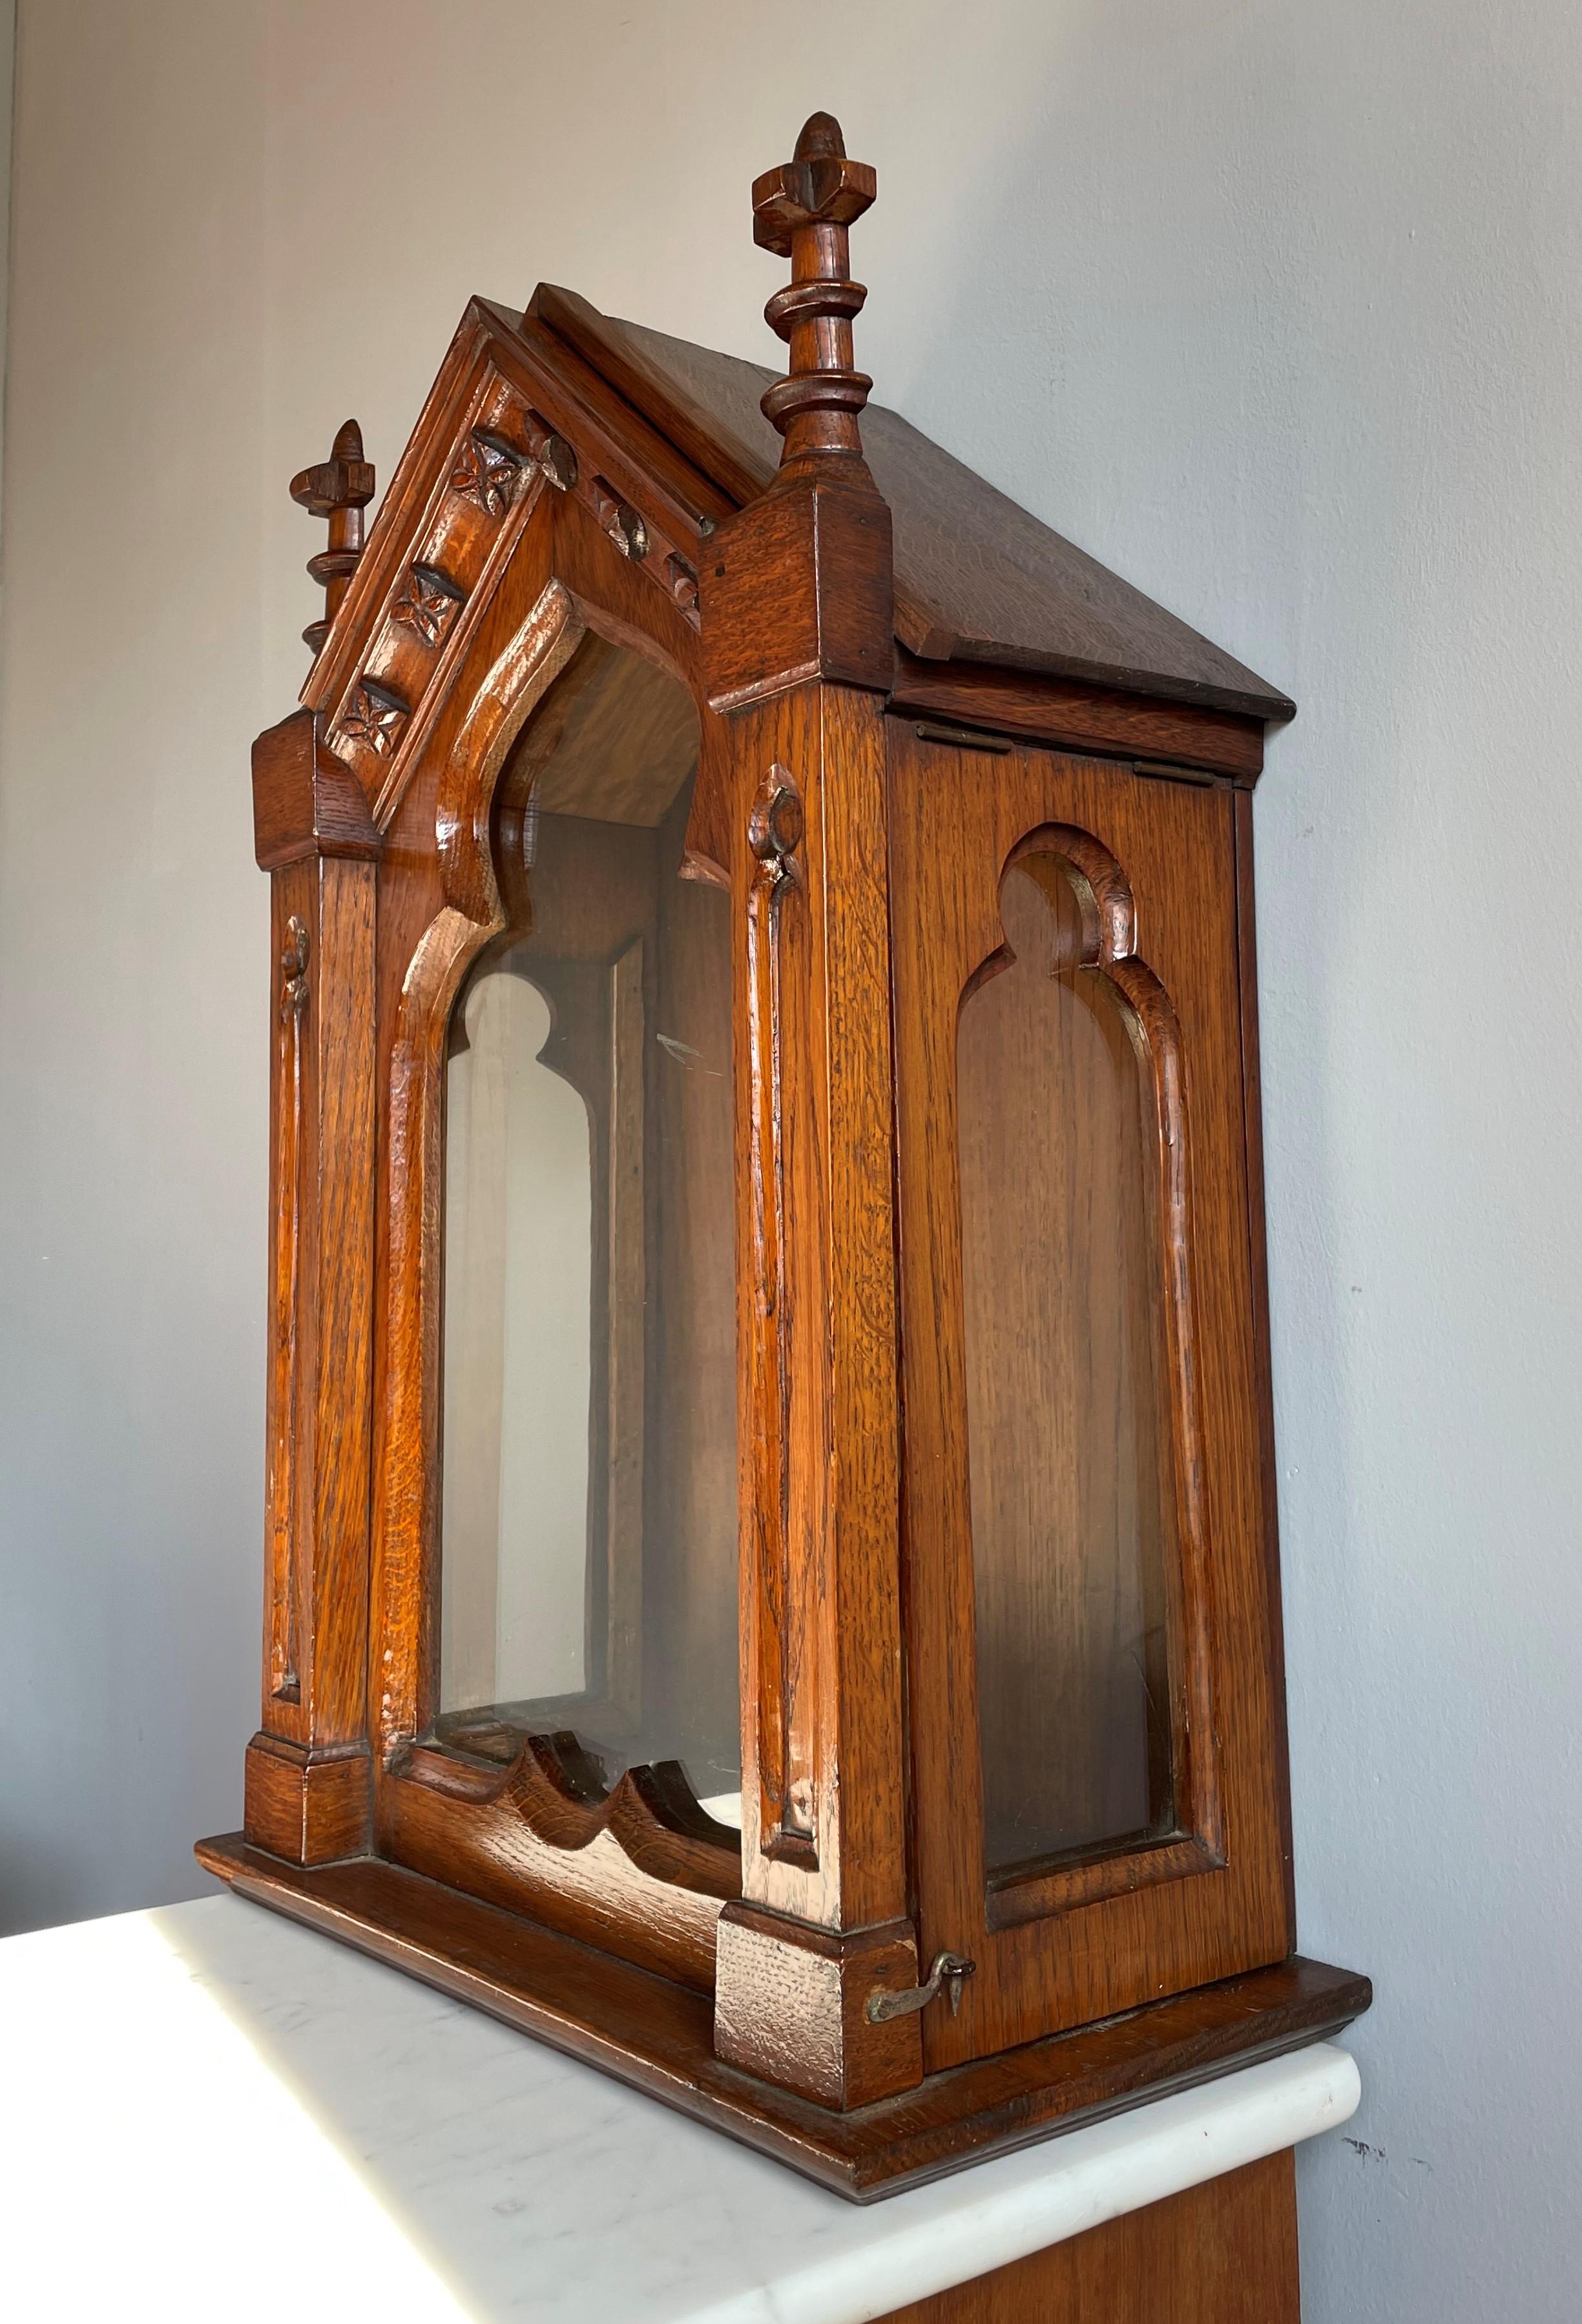 Handcrafted Gothic chapel shape, church statuette cabinet.

If you own an antique saint statue then this late 1800s to early 1900s display cabinet could be the perfect 'chapel' for it. This handcrafted oak cabinet is in very good condition and you